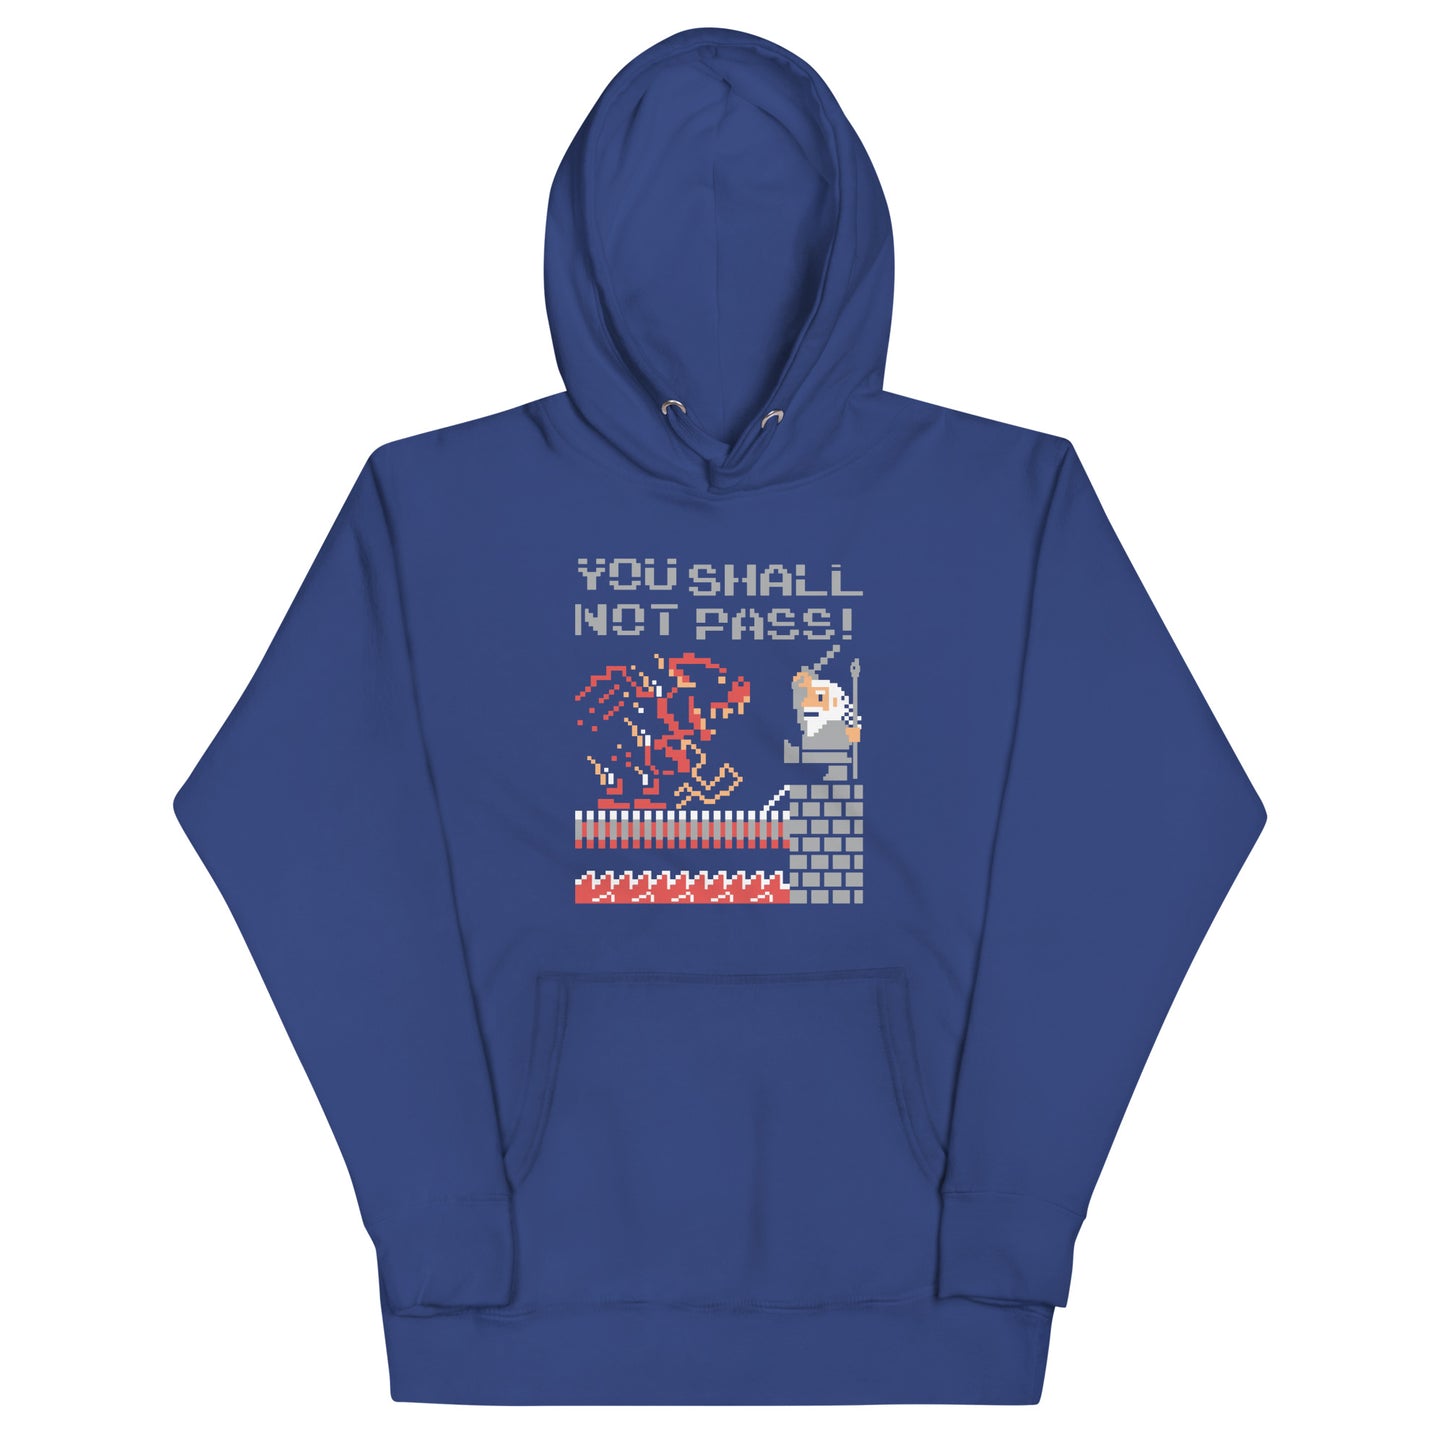 You Shall Not Pass! Unisex Hoodie